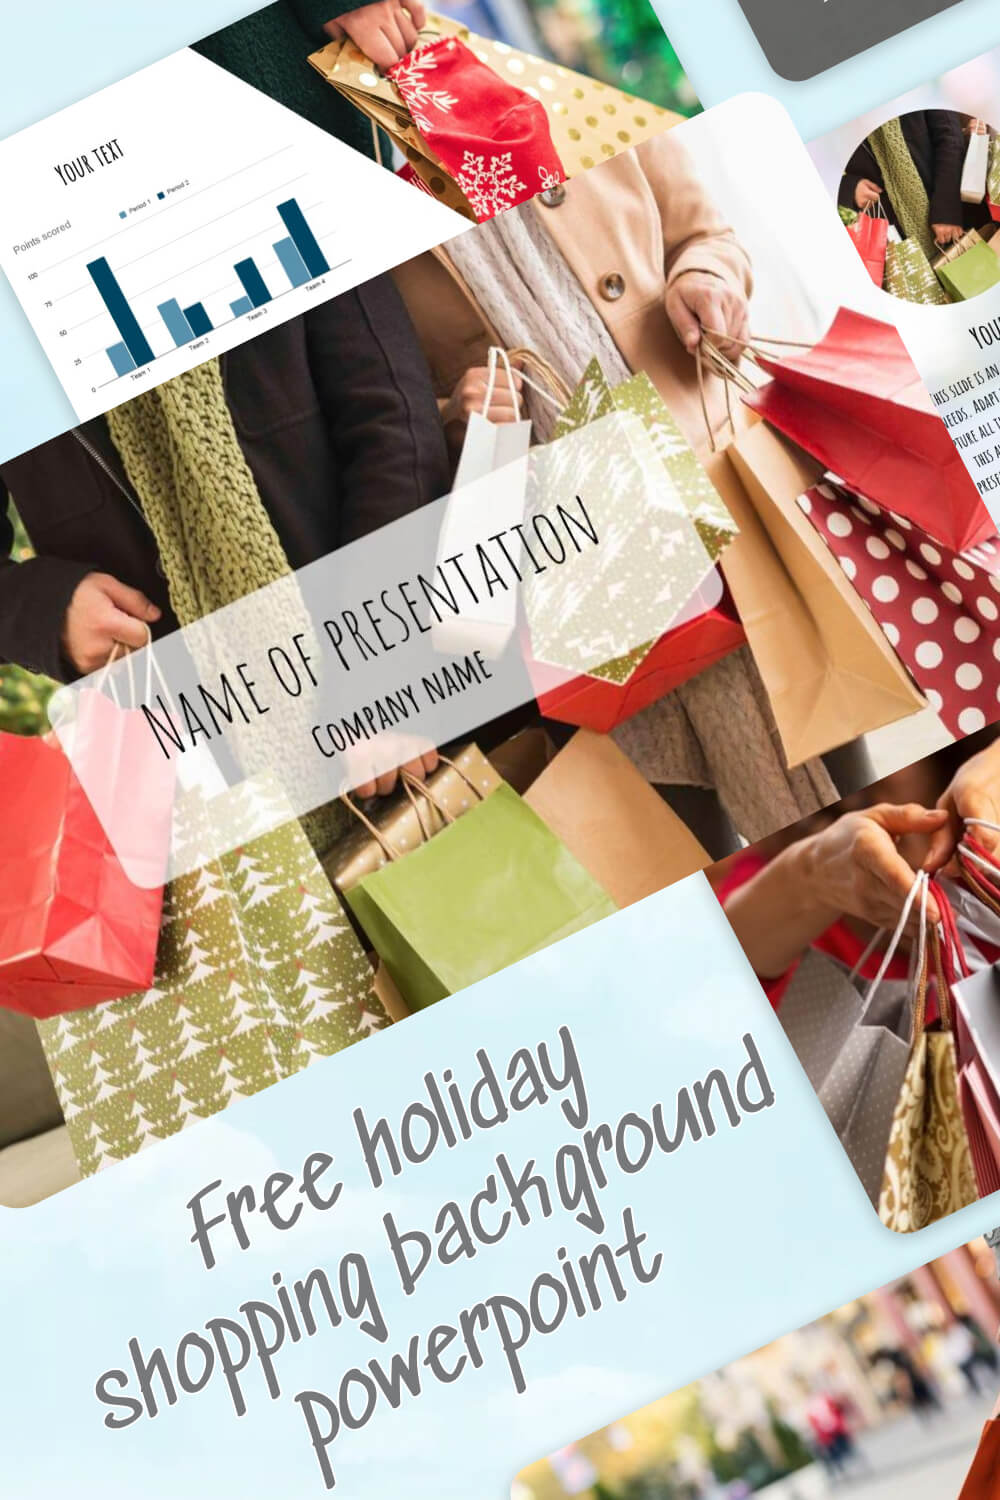 free holiday shopping background powerpoint 3